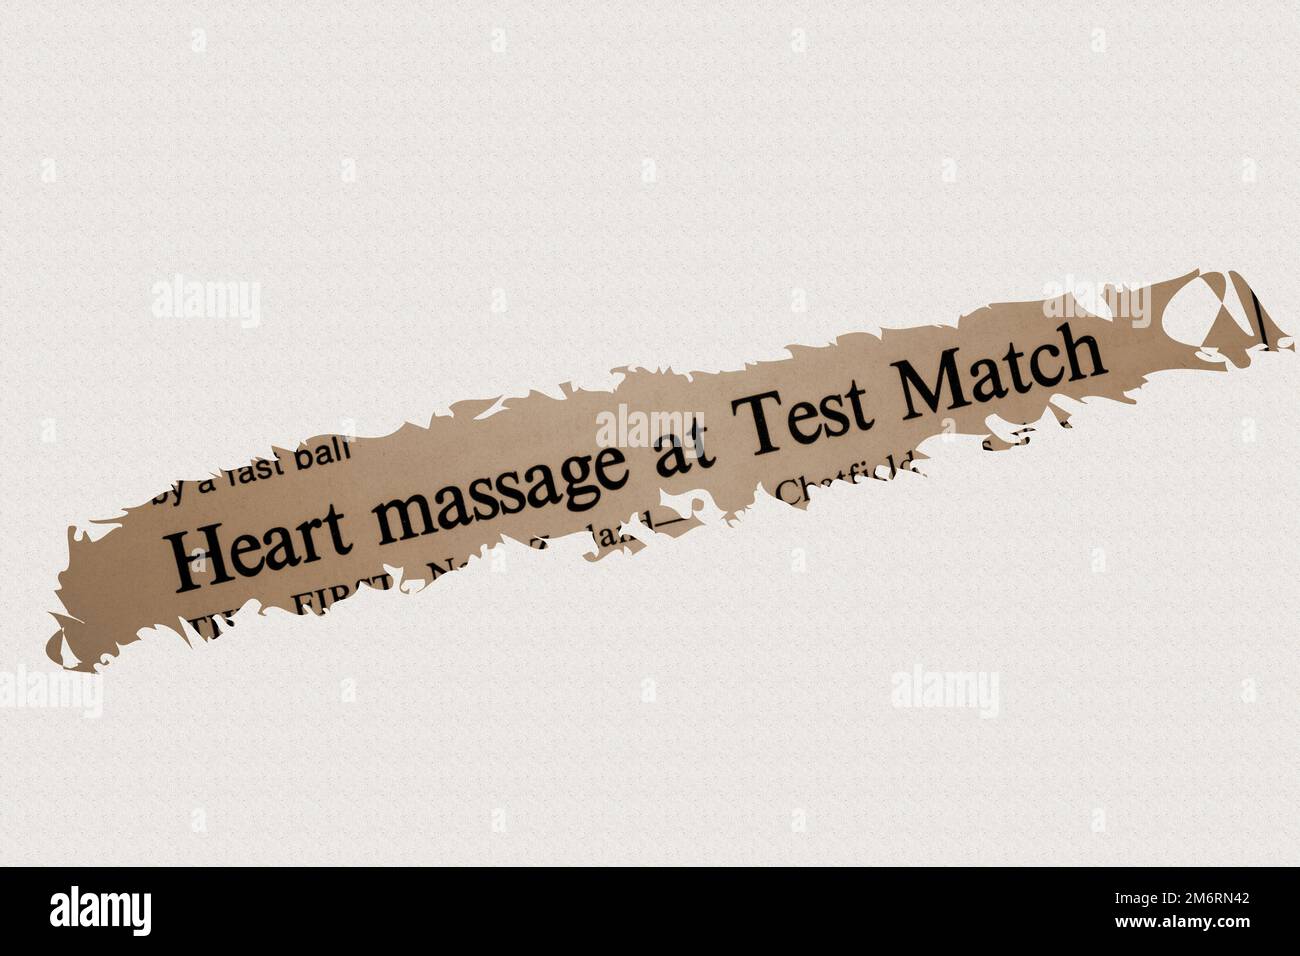 Heart massage at Test Match - news story from 1975 newspaper headline article title with overlay in sepia Stock Photo